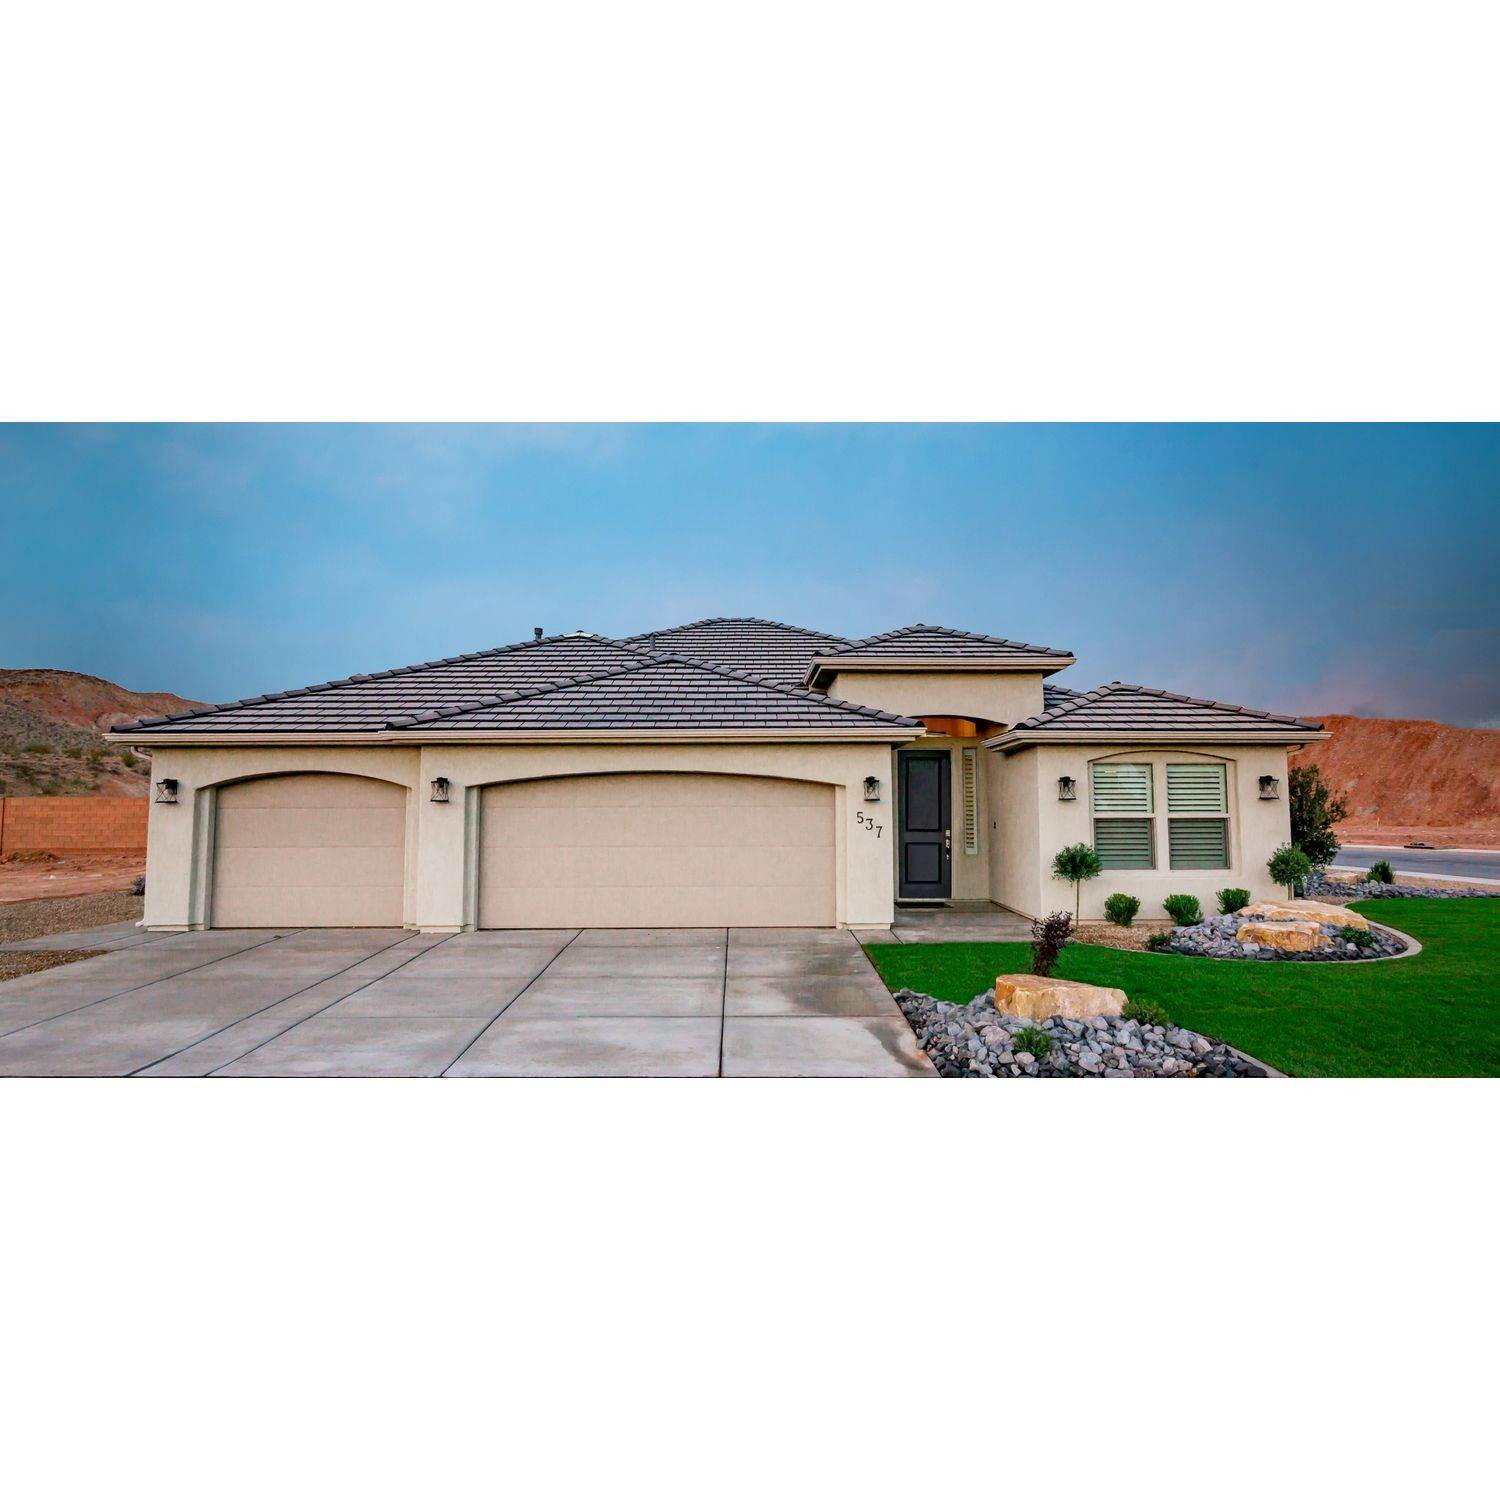 Red Waters building at 537 S Mirage Dr, Washington, UT 84780